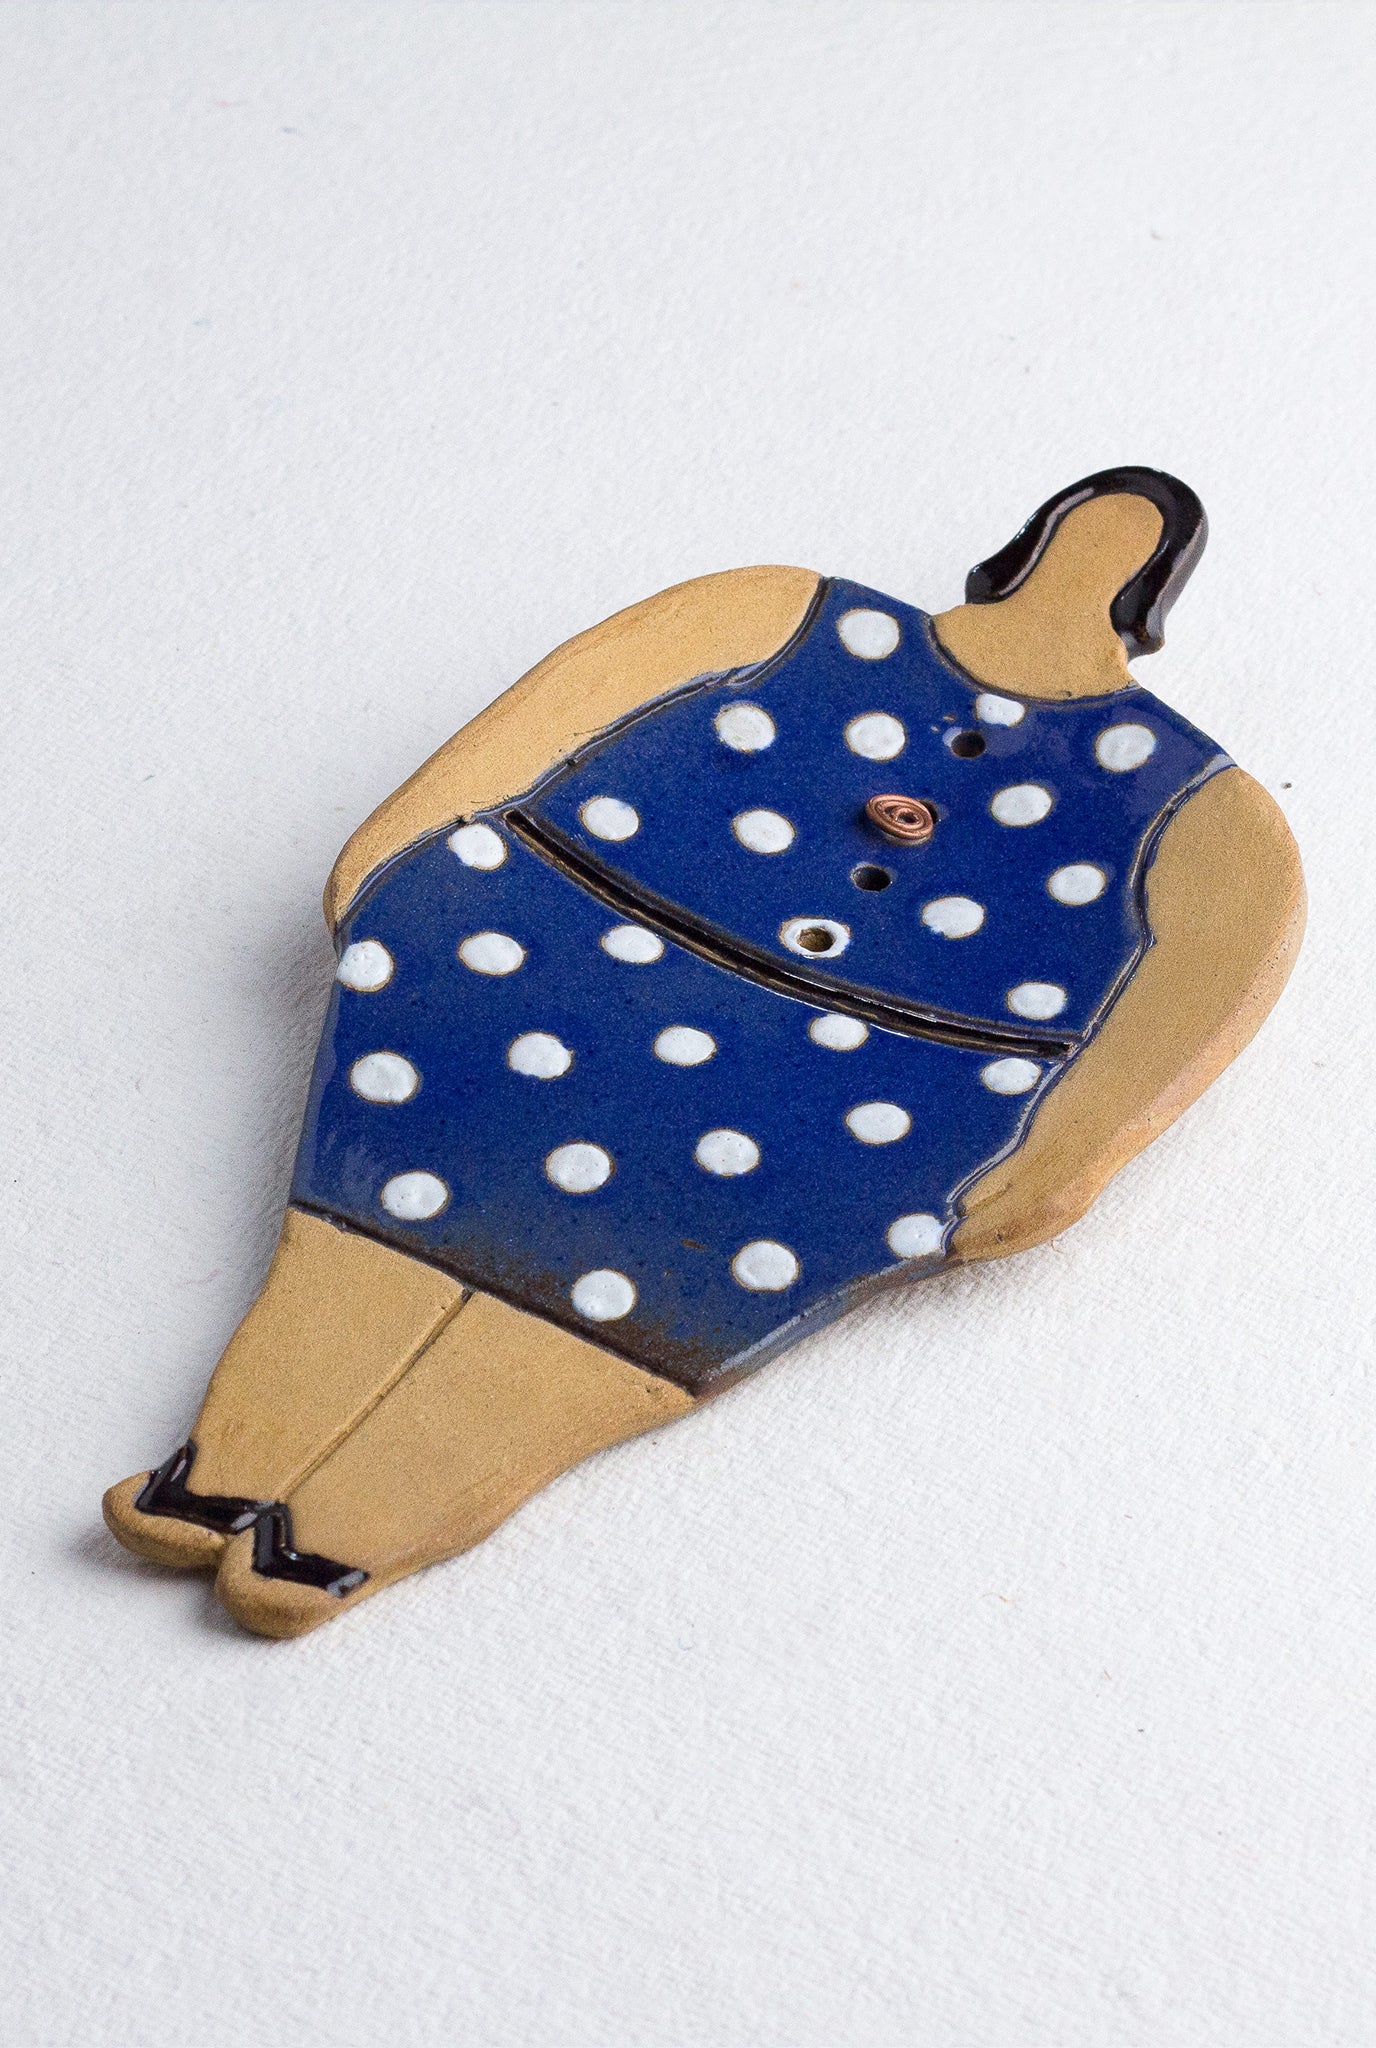 decor-handcrafted-ceramic-handpainted-wall decor-spoon rest